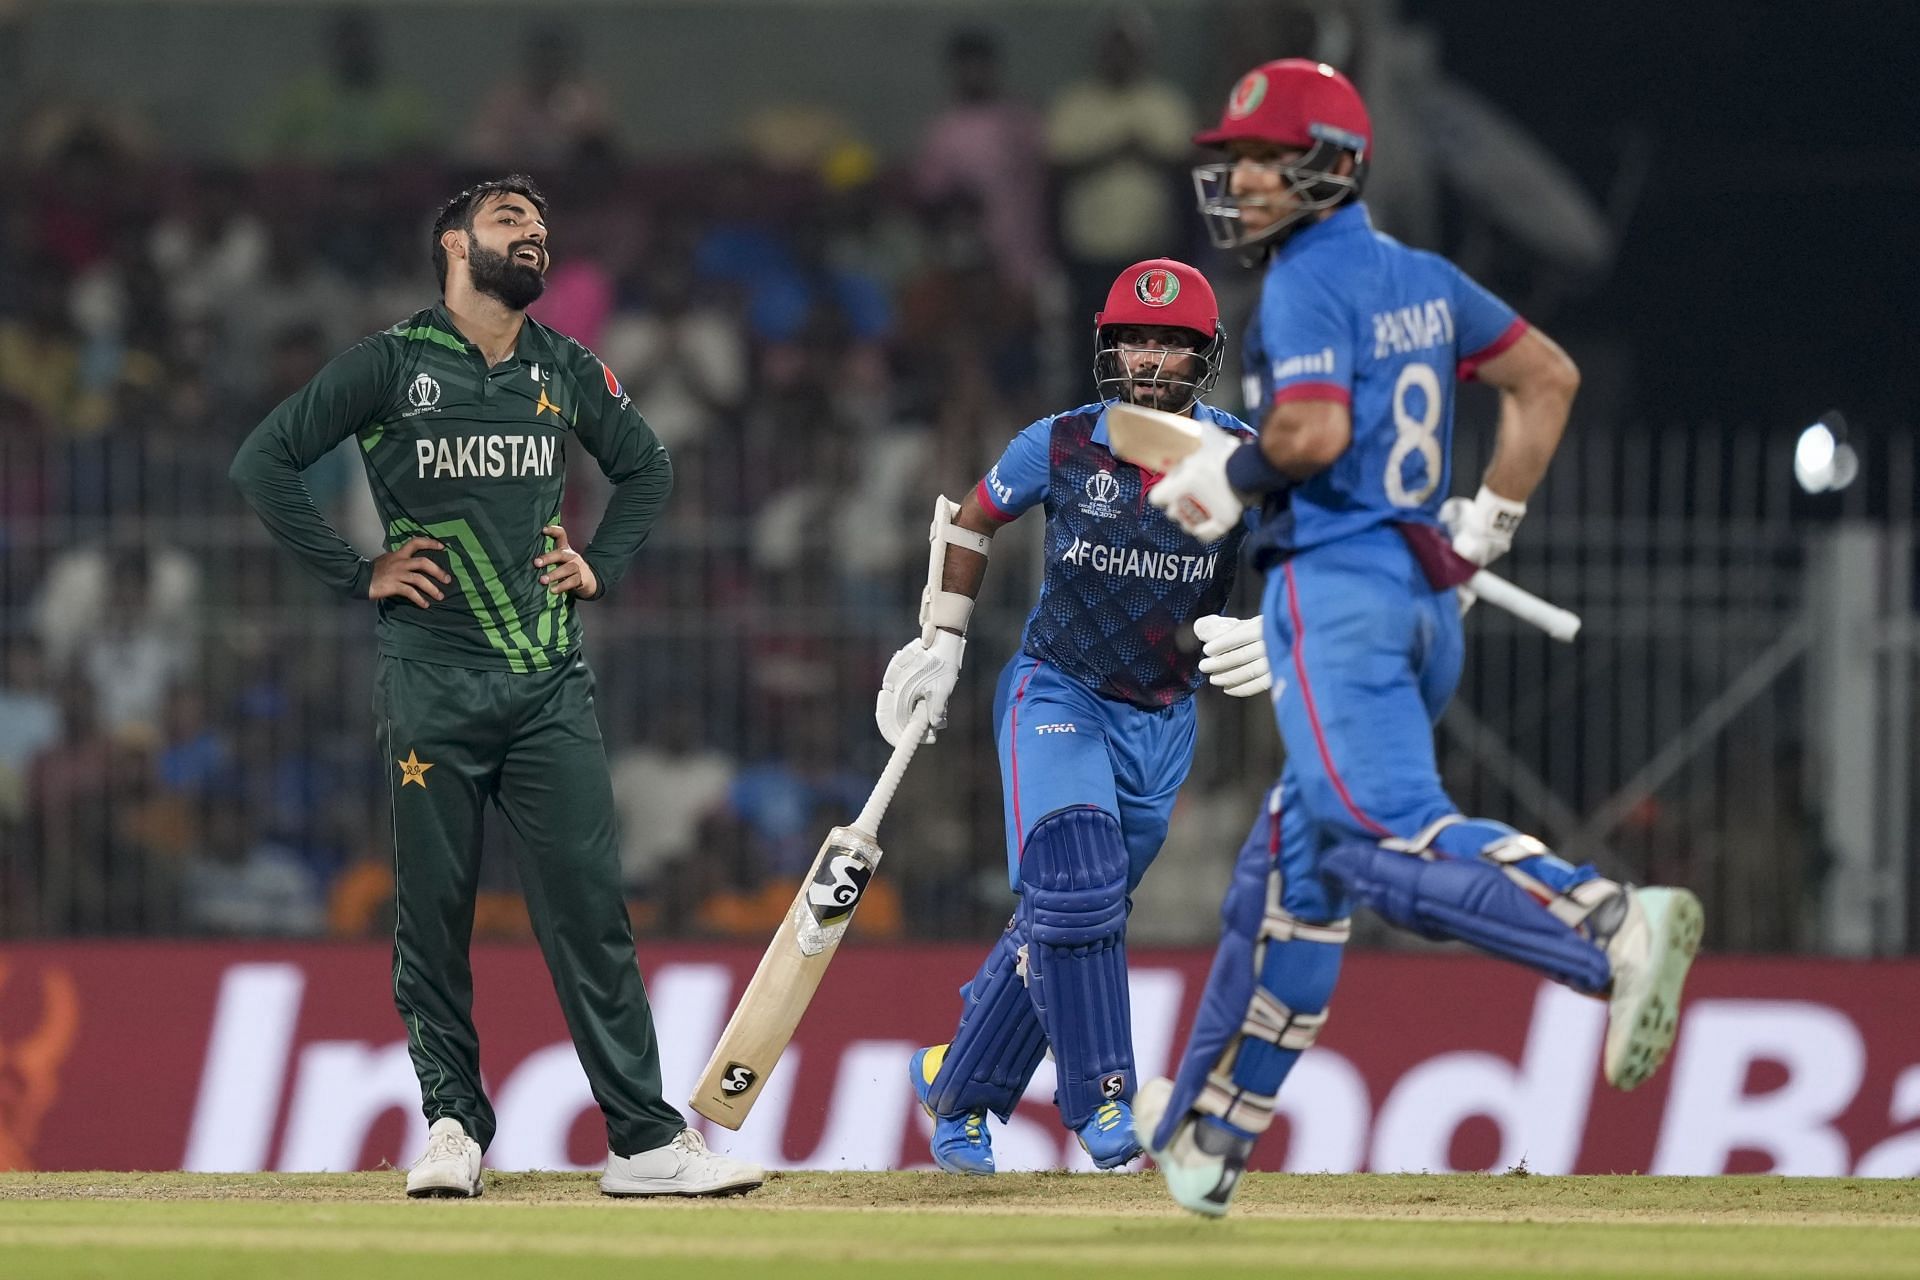 The Pakistan spinners failed to pick up a wicket on a spin-friendly track. [P/C: AP]